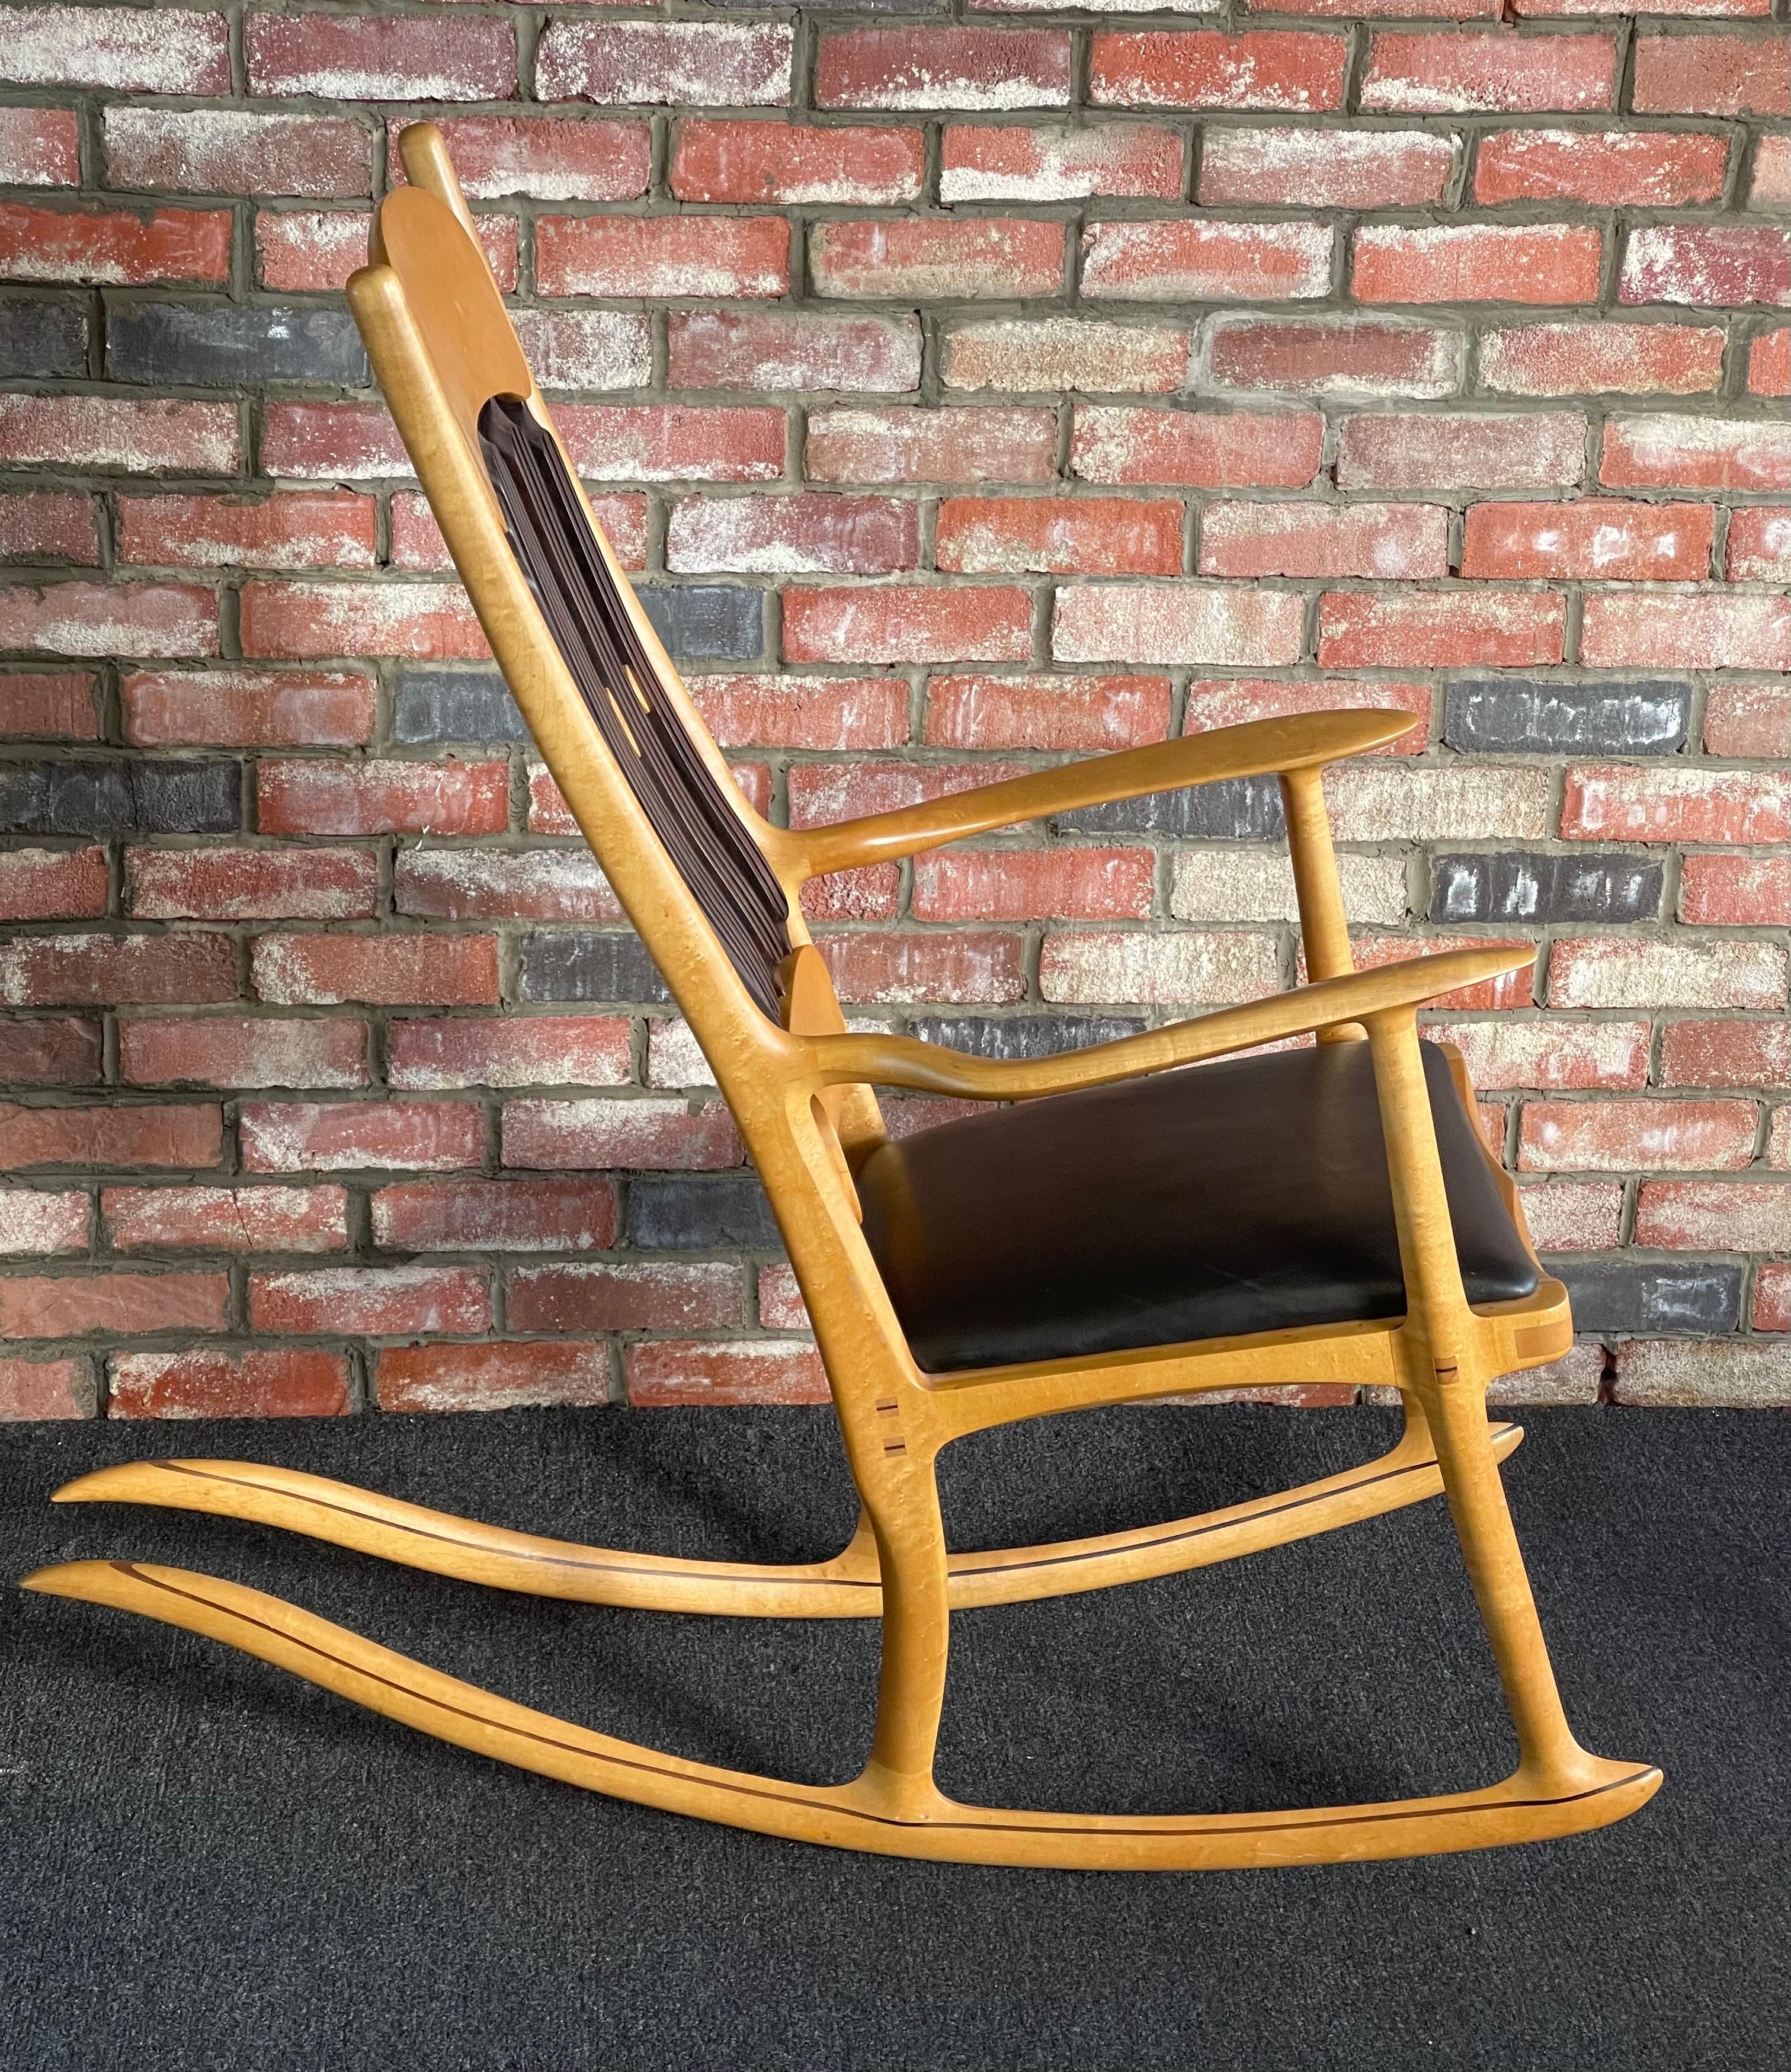 American  Handcrafted Artisan Studio Rocking Chair by Jeffry Mann 1987 For Sale